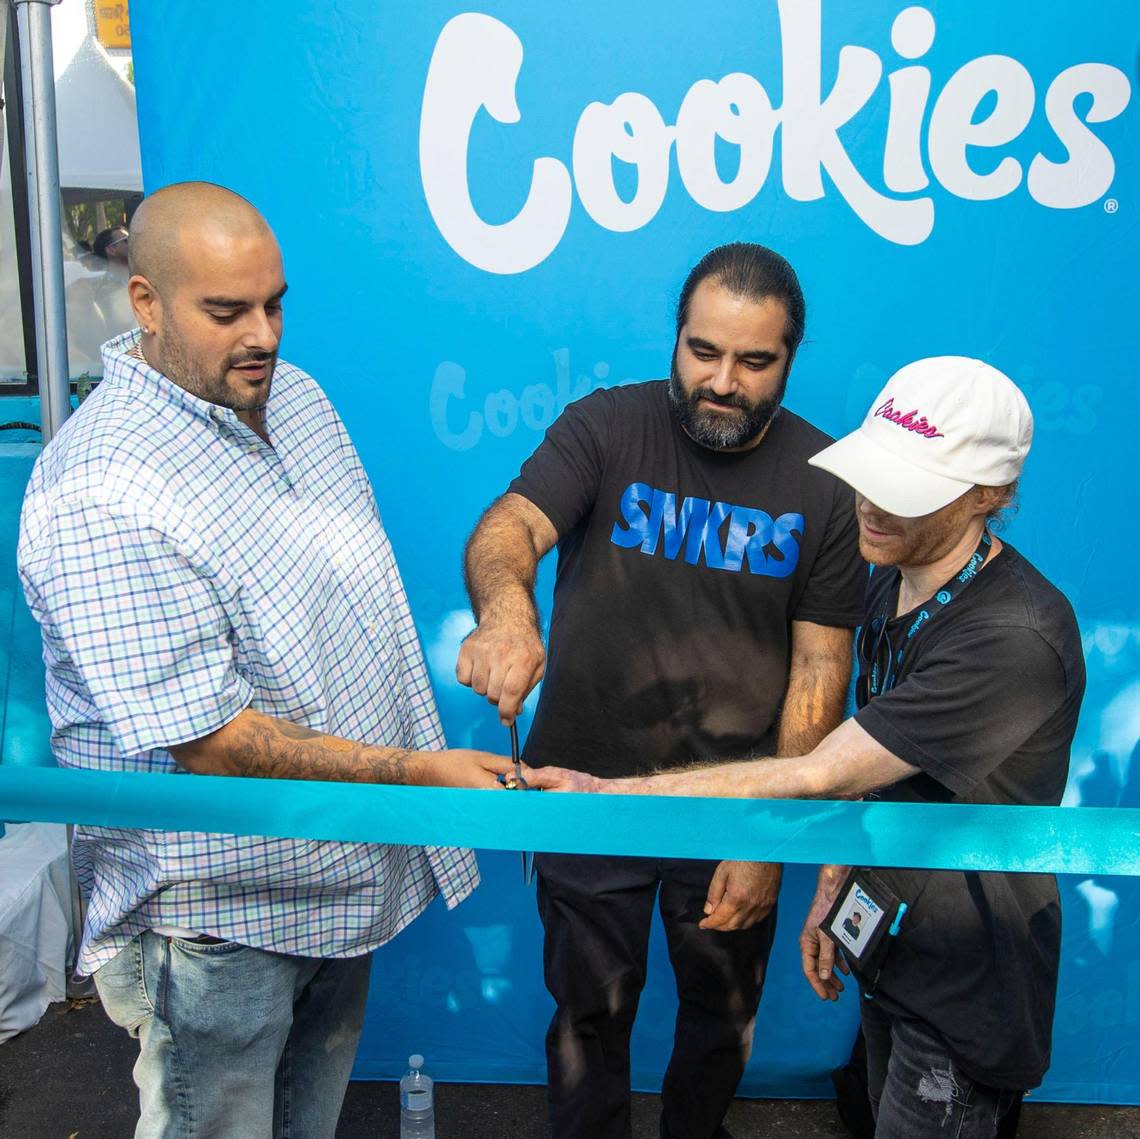 Cookies founder Berner, left, AK, TRP Head of Cultivation, center, and Marcus Moates, TRP Head of Extraction, left, participate in the ribbon cutting ceremony during the grand opening of Cookies Miami, Florida’s first and only minority-owned marijuana dispensary, in Miami on Saturday, Aug. 13, 2022. Daniel A. Varela/dvarela@miamiherald.com